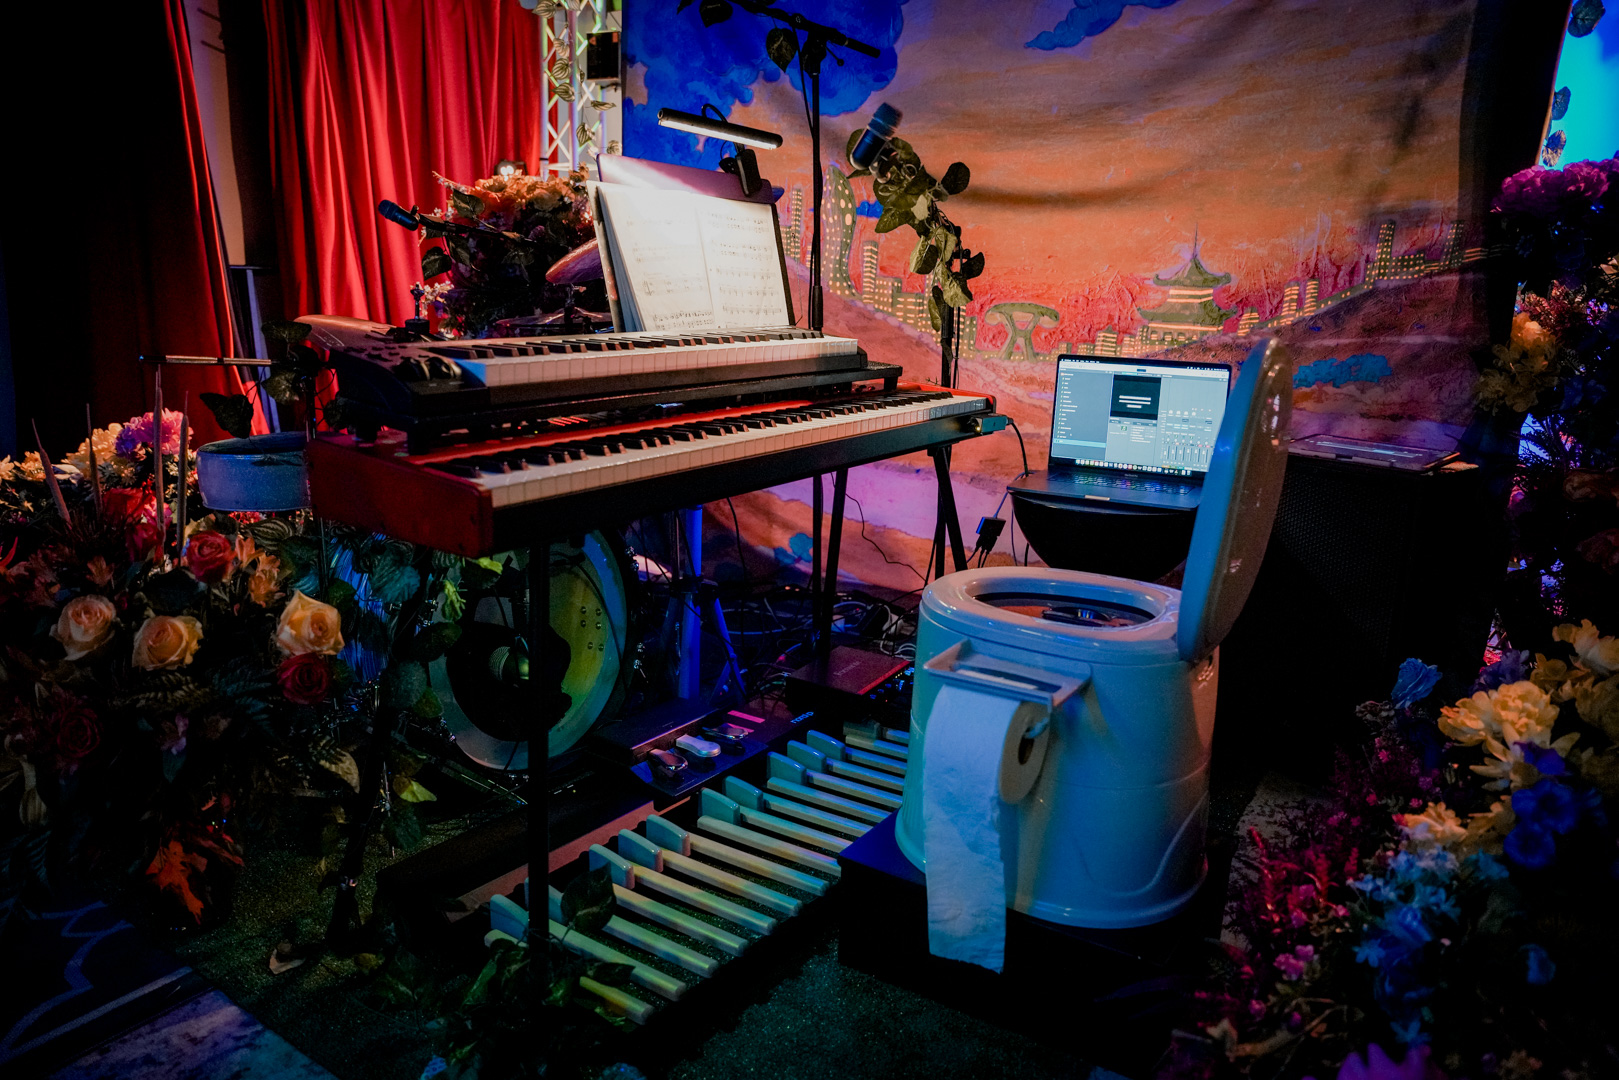 A toilet on stage with keyboards